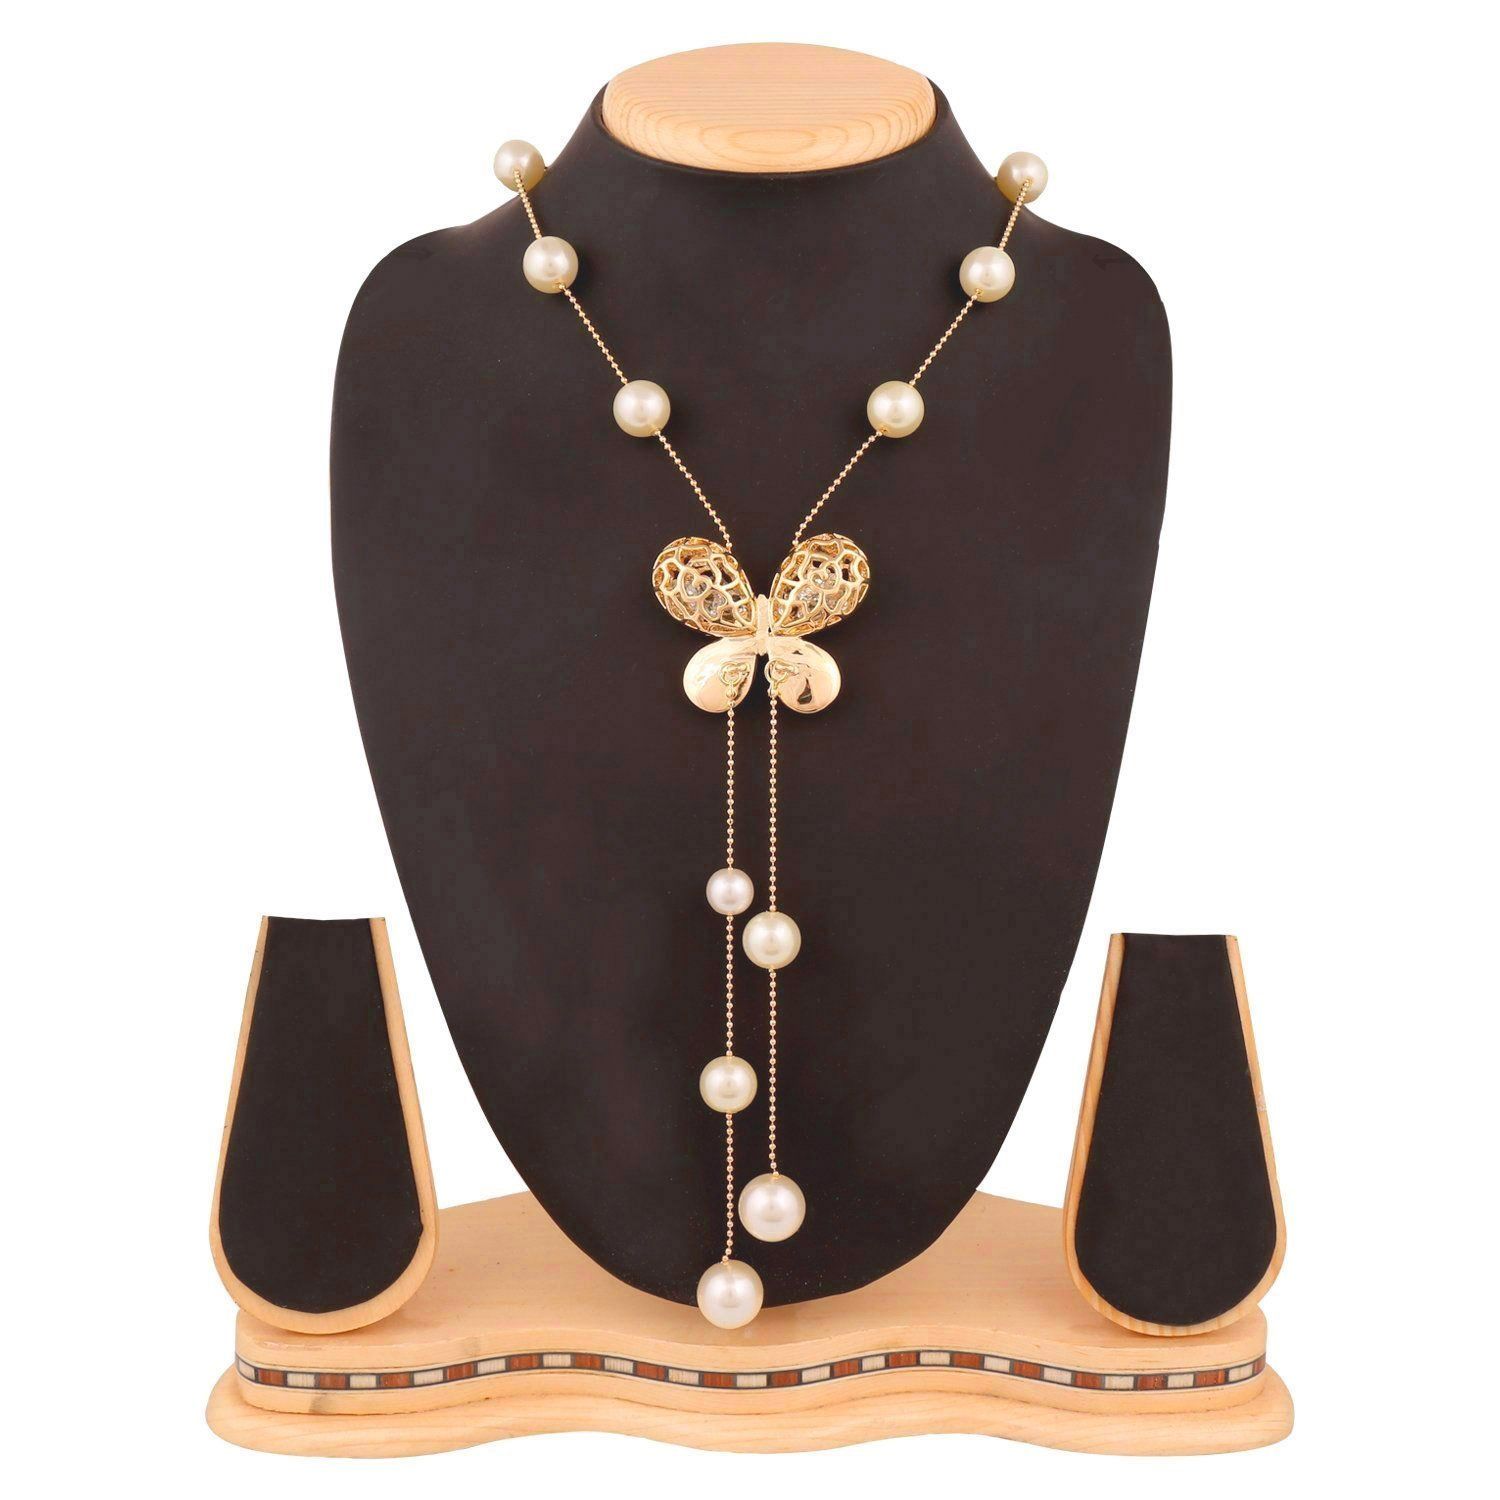 Indian Jewellery With Western Outfits  15 Amazing Ideas For Western Dresses   POPxo